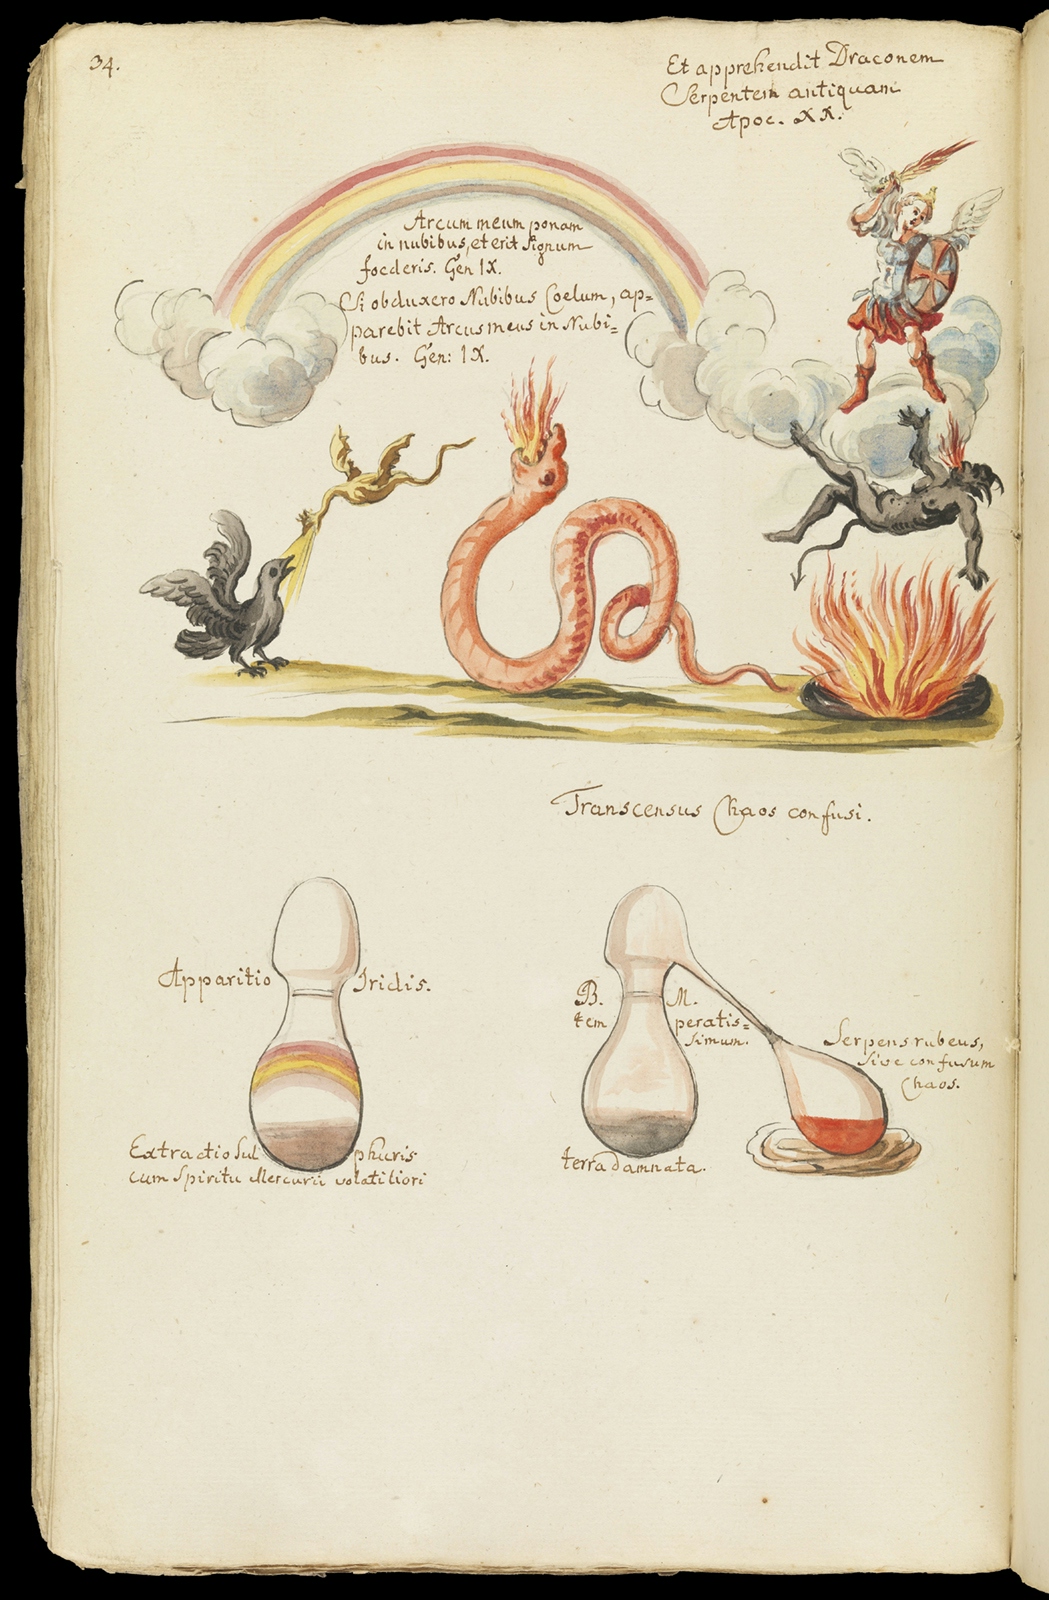 A digital reproduction of a page from a book, which has two hand drawn, colour drawings on it. The first shows a rainbow and a warrior standing on a cloud attacking three monsters (a bird, serpent and a demon); the second shows scientific apparatus.